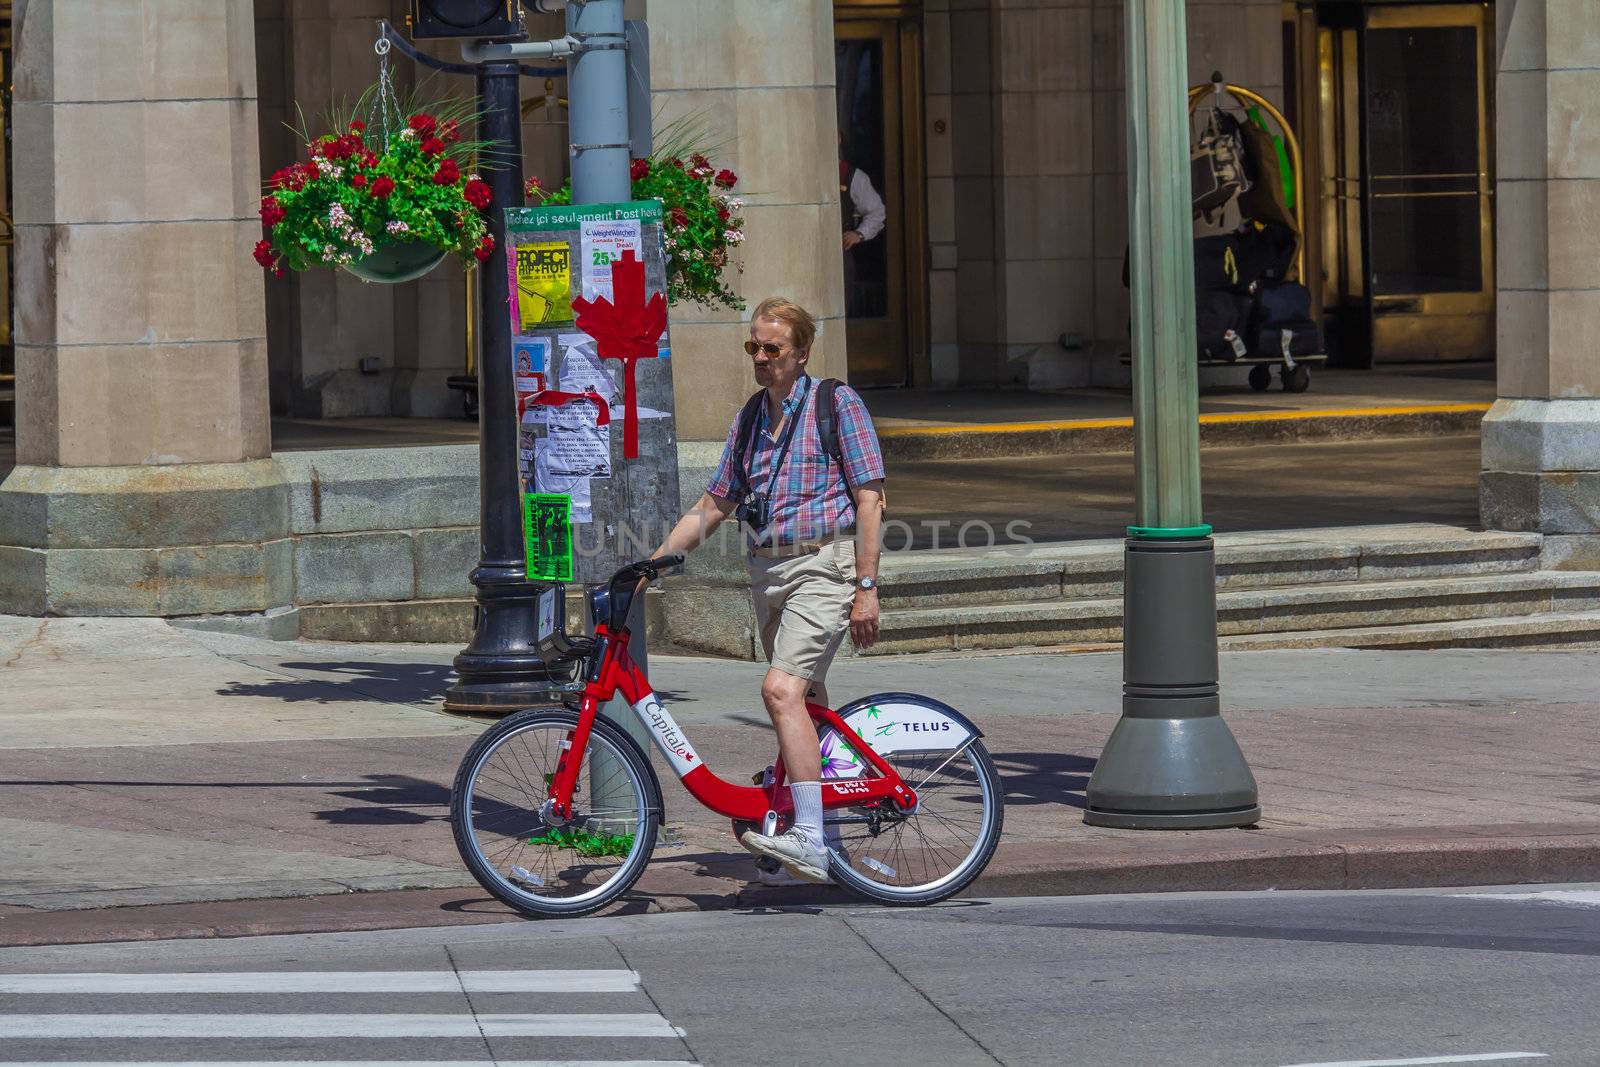 A bicyclist in Ottawa standing, waiting for someting, Ontario, Canada